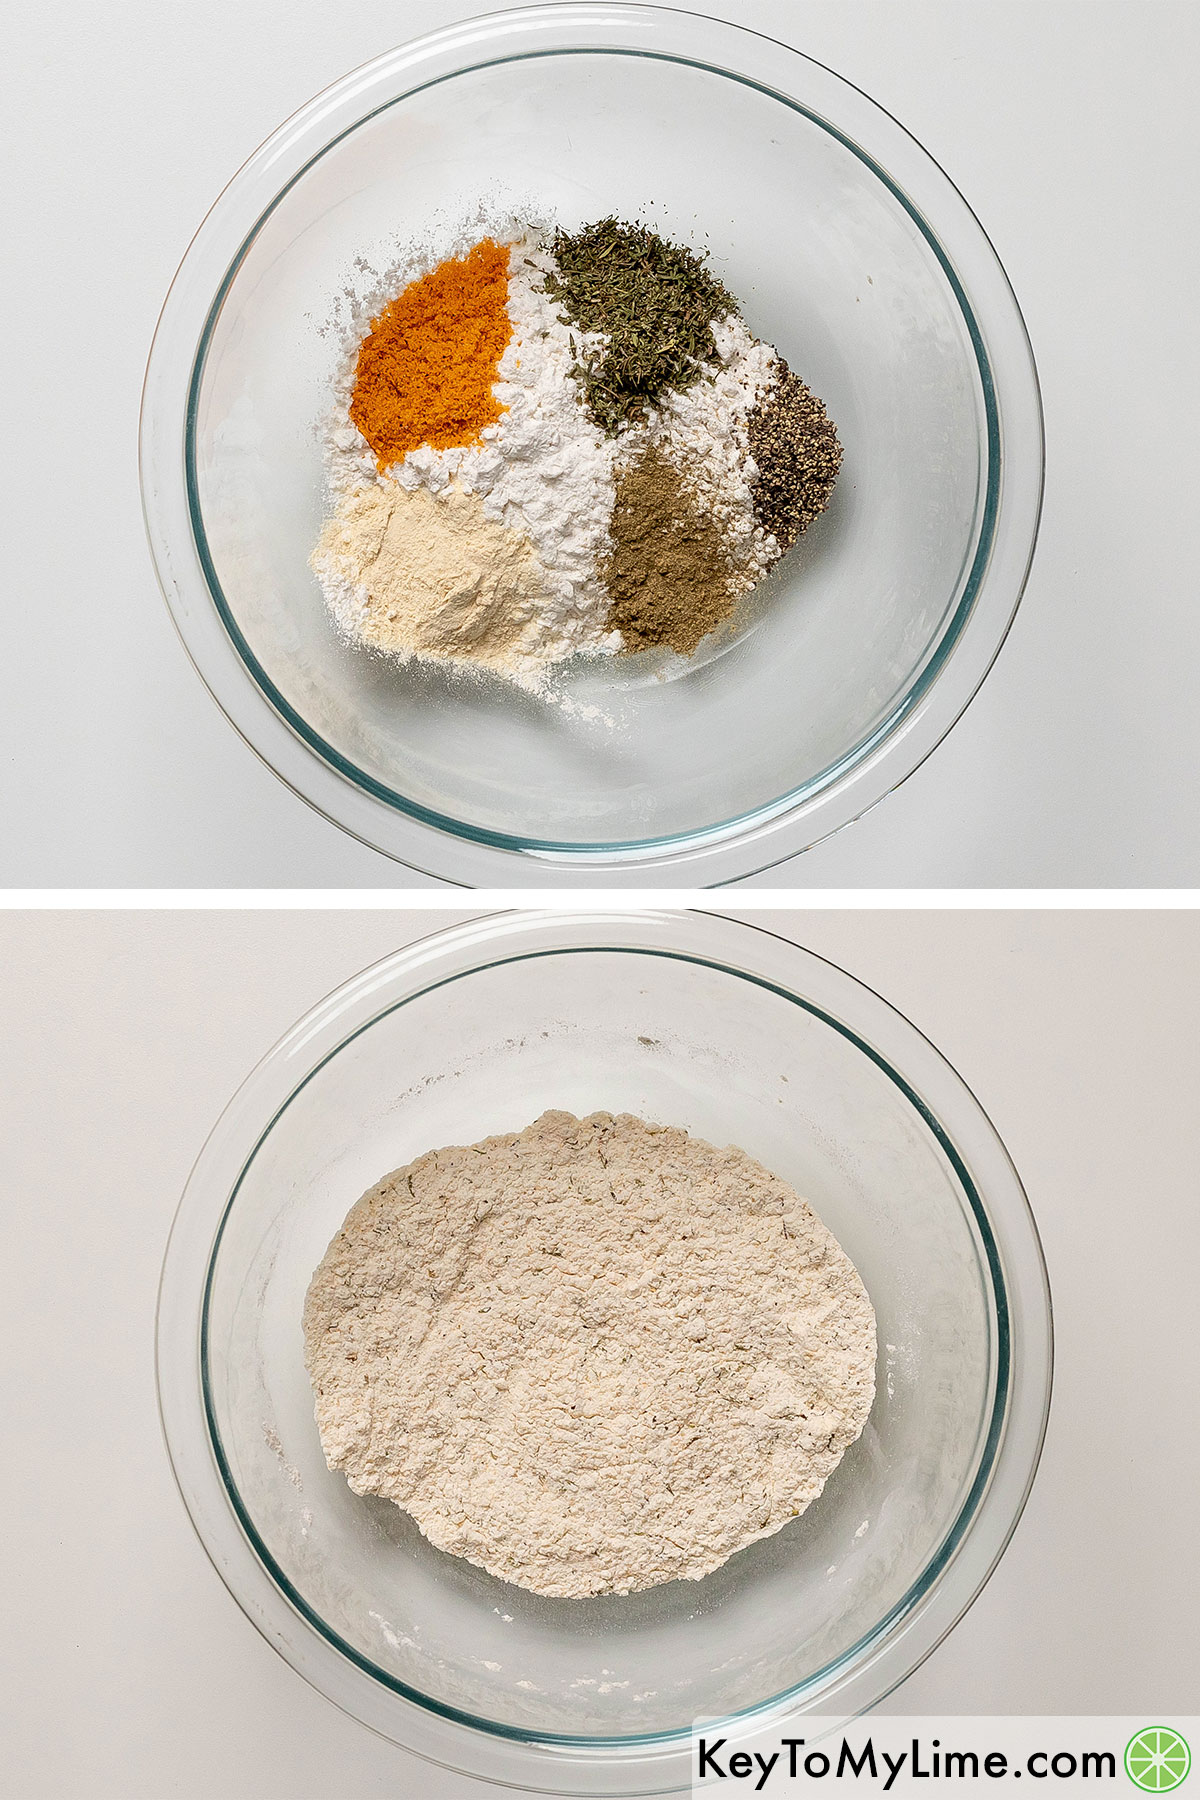 Adding the seasonings to a small mixing bowl with flour, and then mixing together.